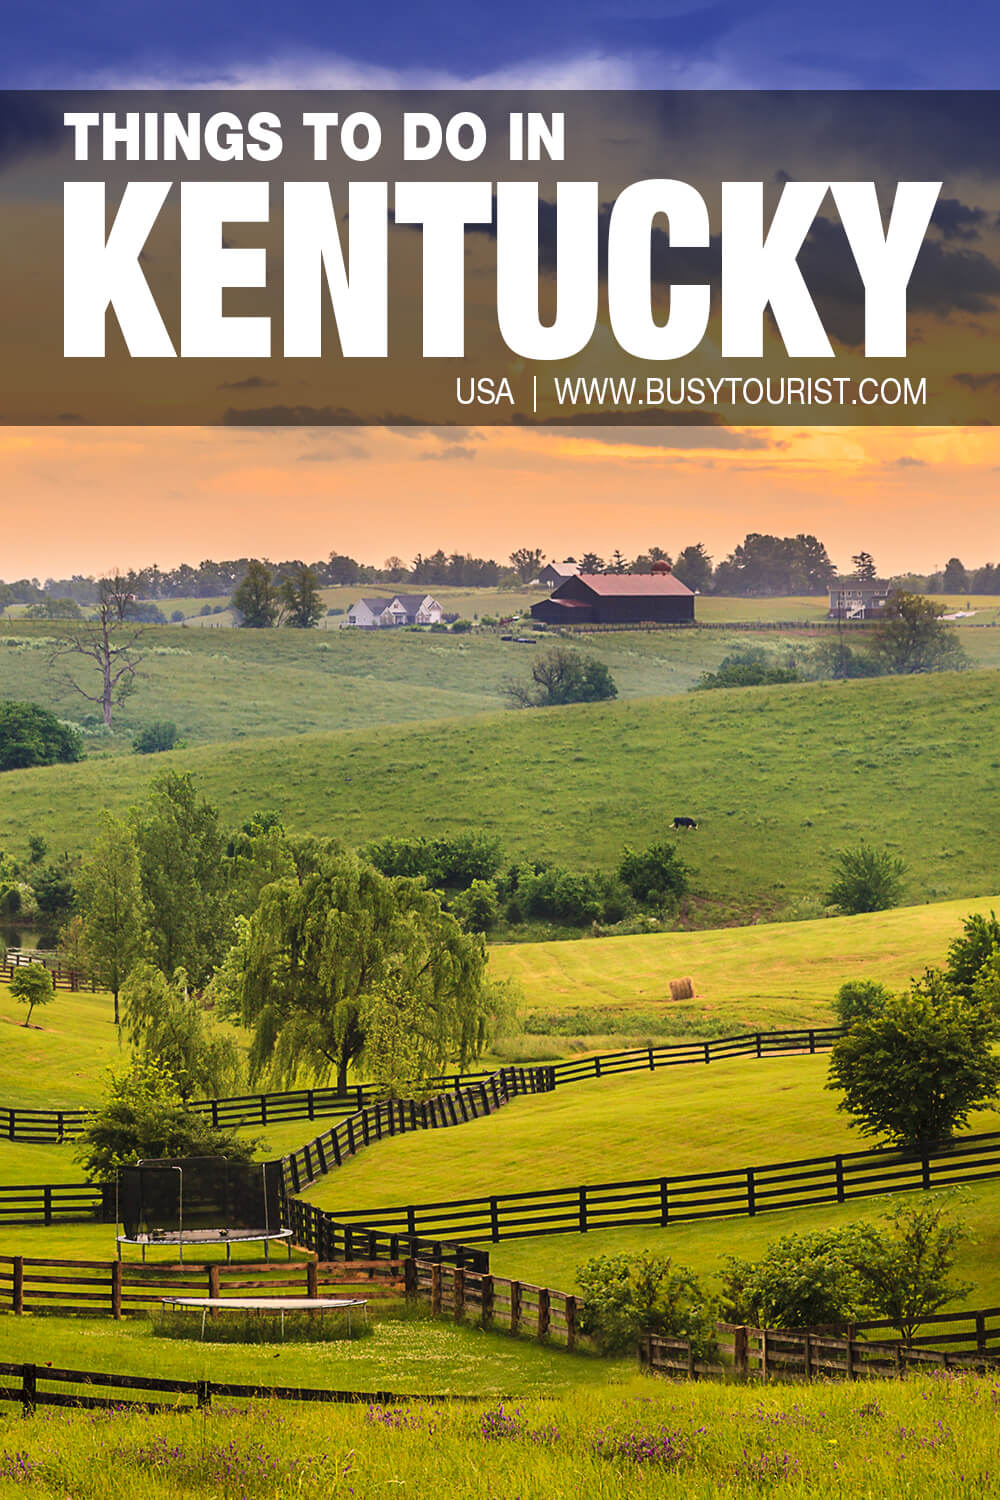 45 Things To Do & Places To Visit In Kentucky Attractions & Activities